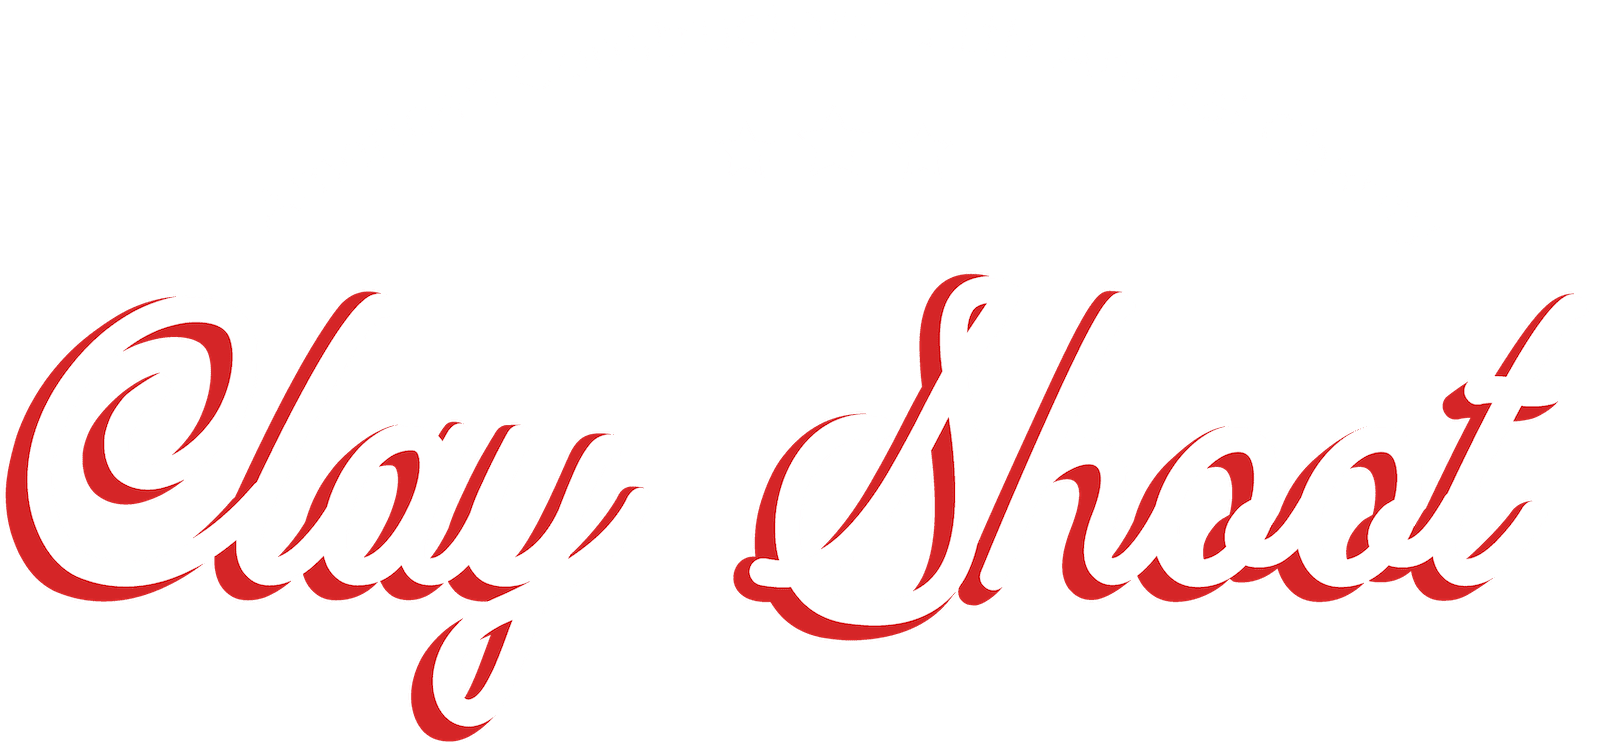 American Constructors' 11th Annual Clay Shoot